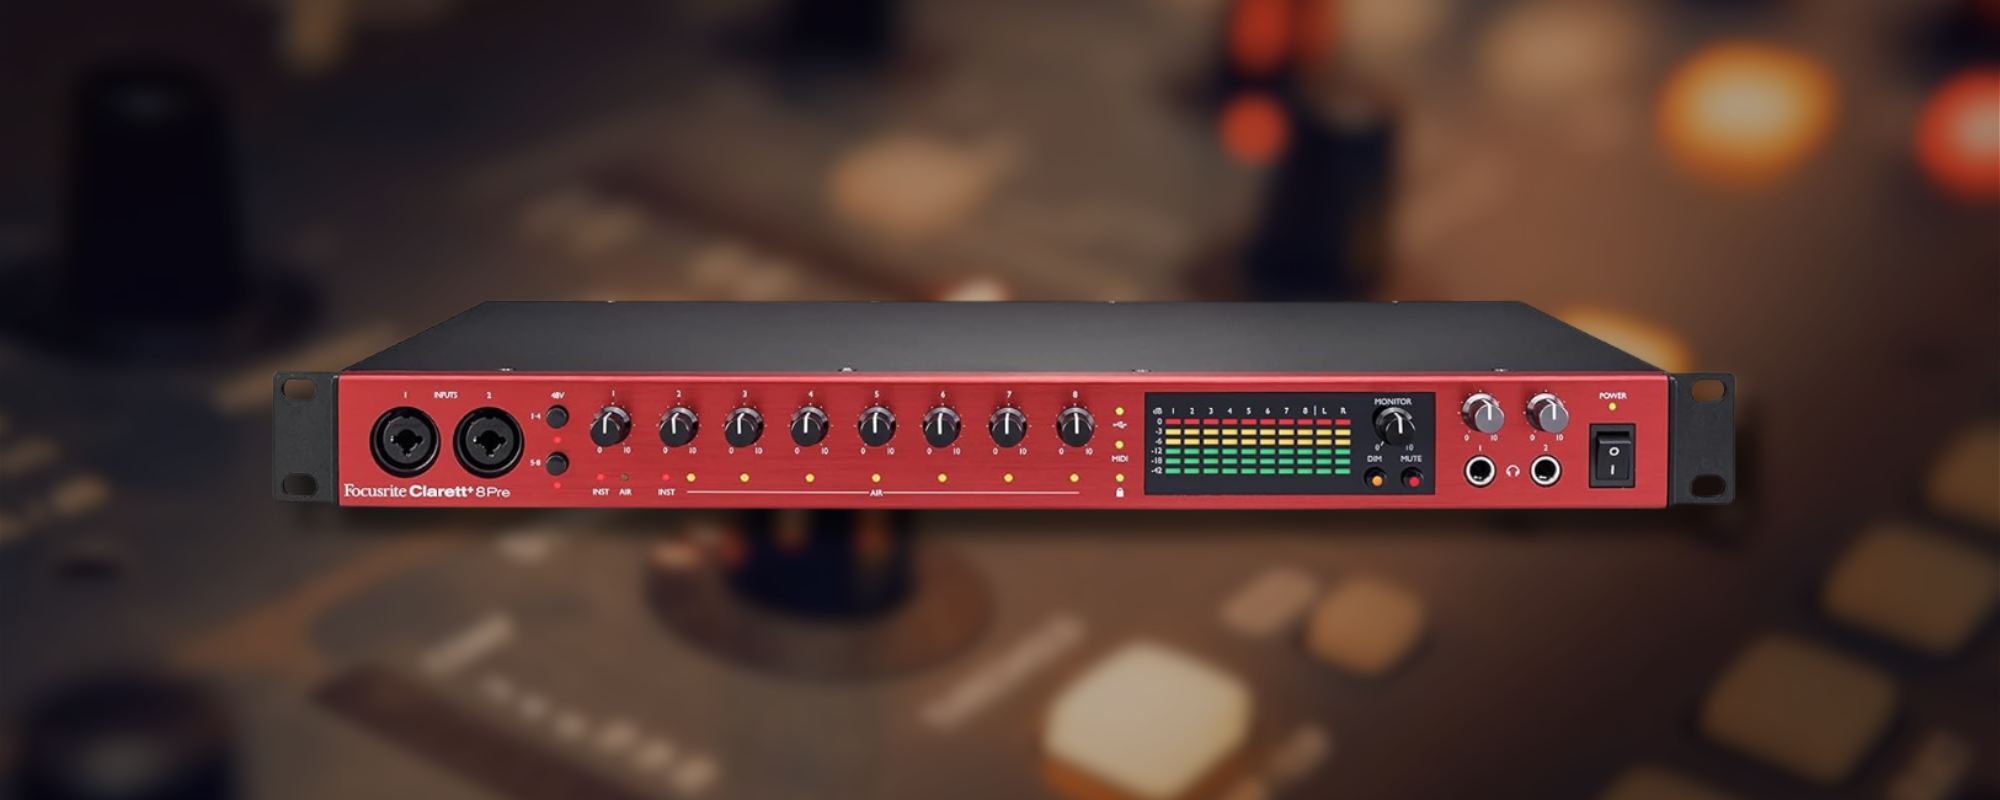 Focusrite Clarett+ 8Pre Review: A Step Up for Home (and Pro) Engineers